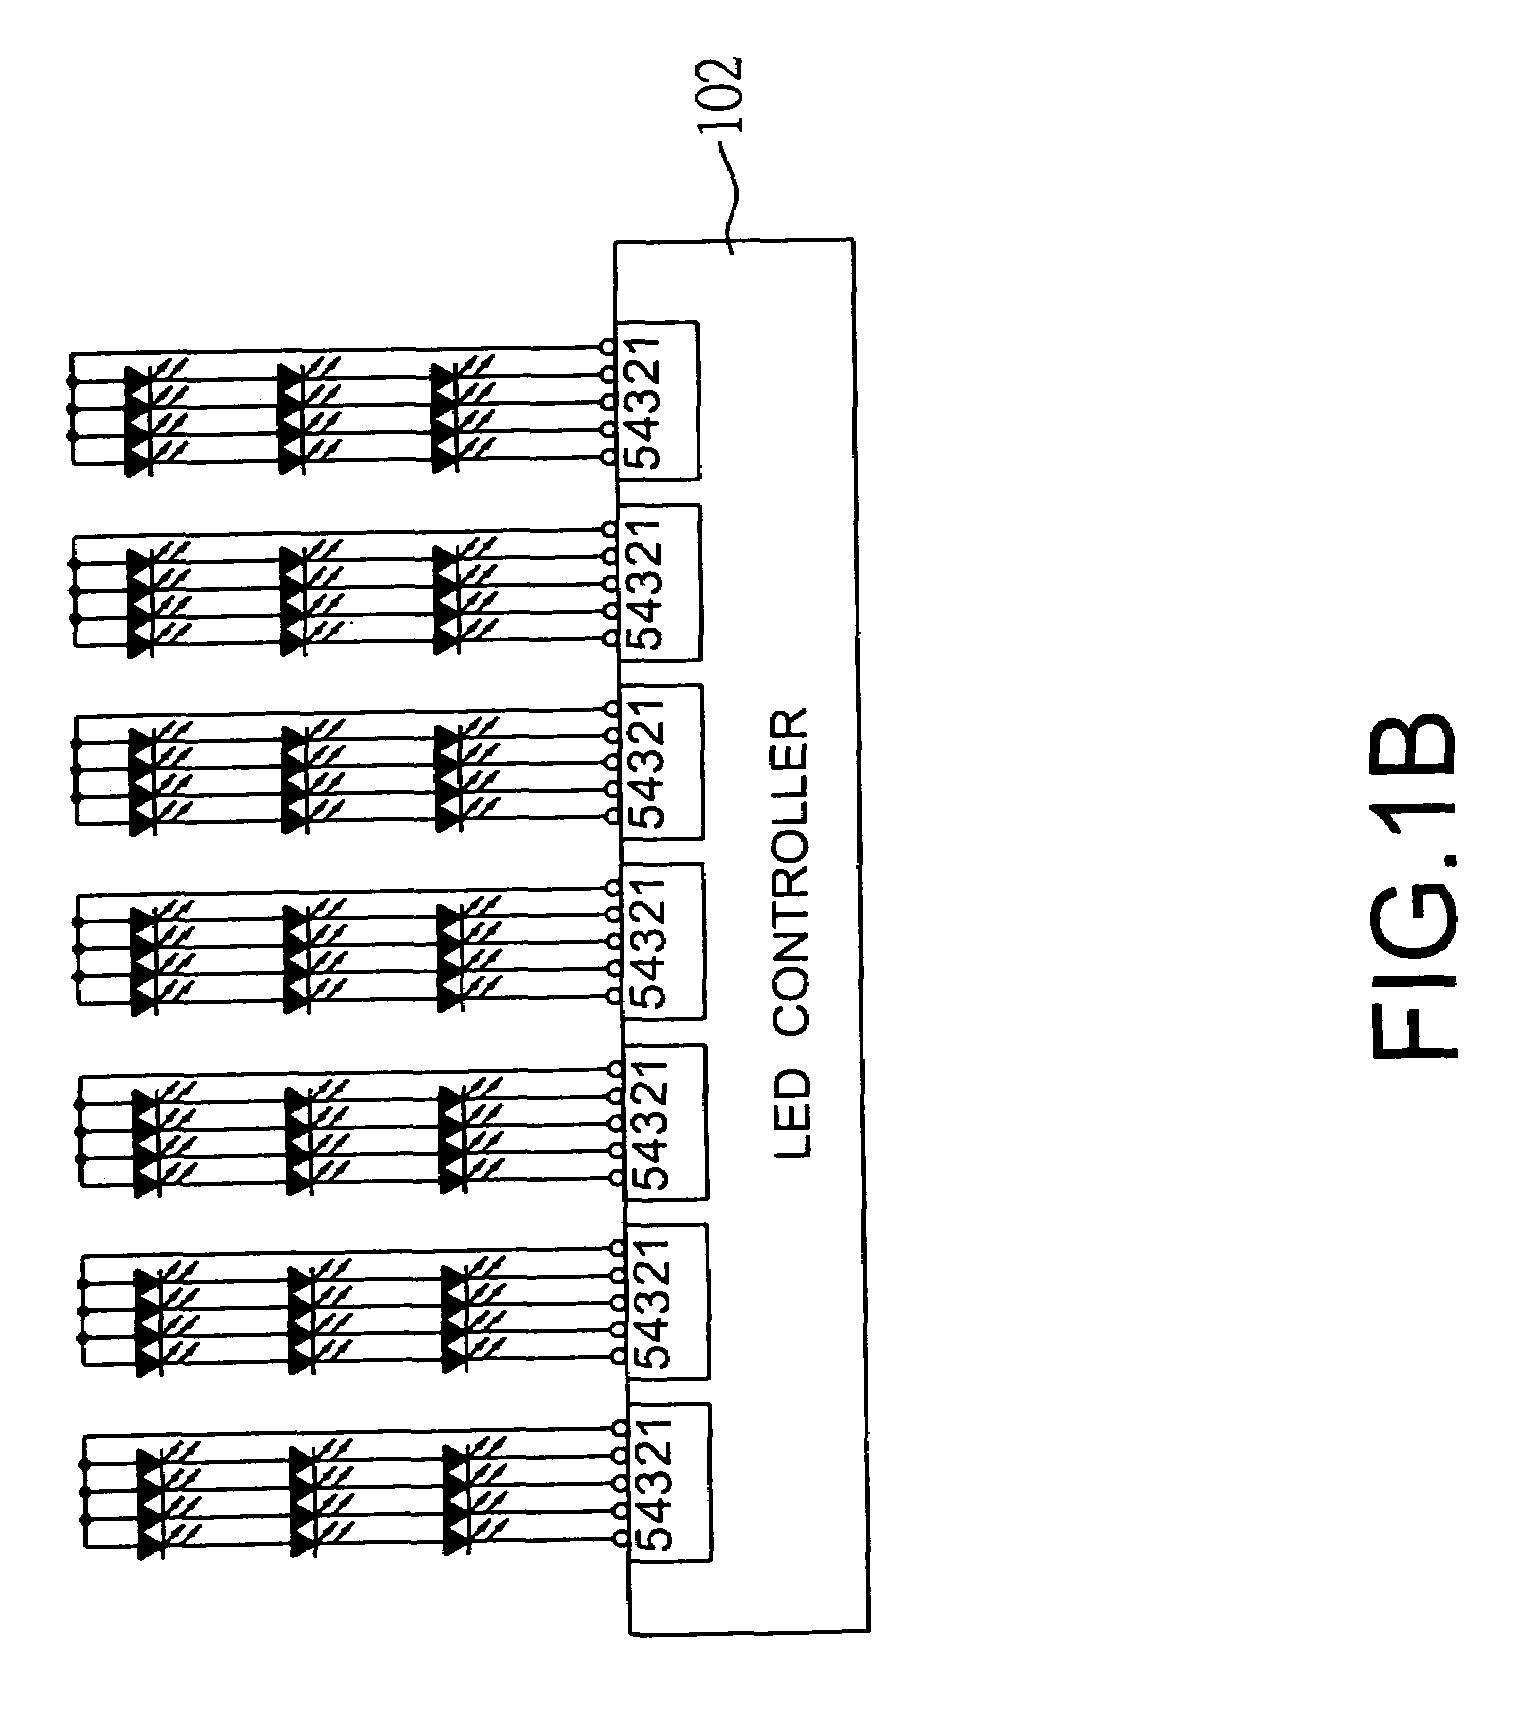 System for controlling LED devices